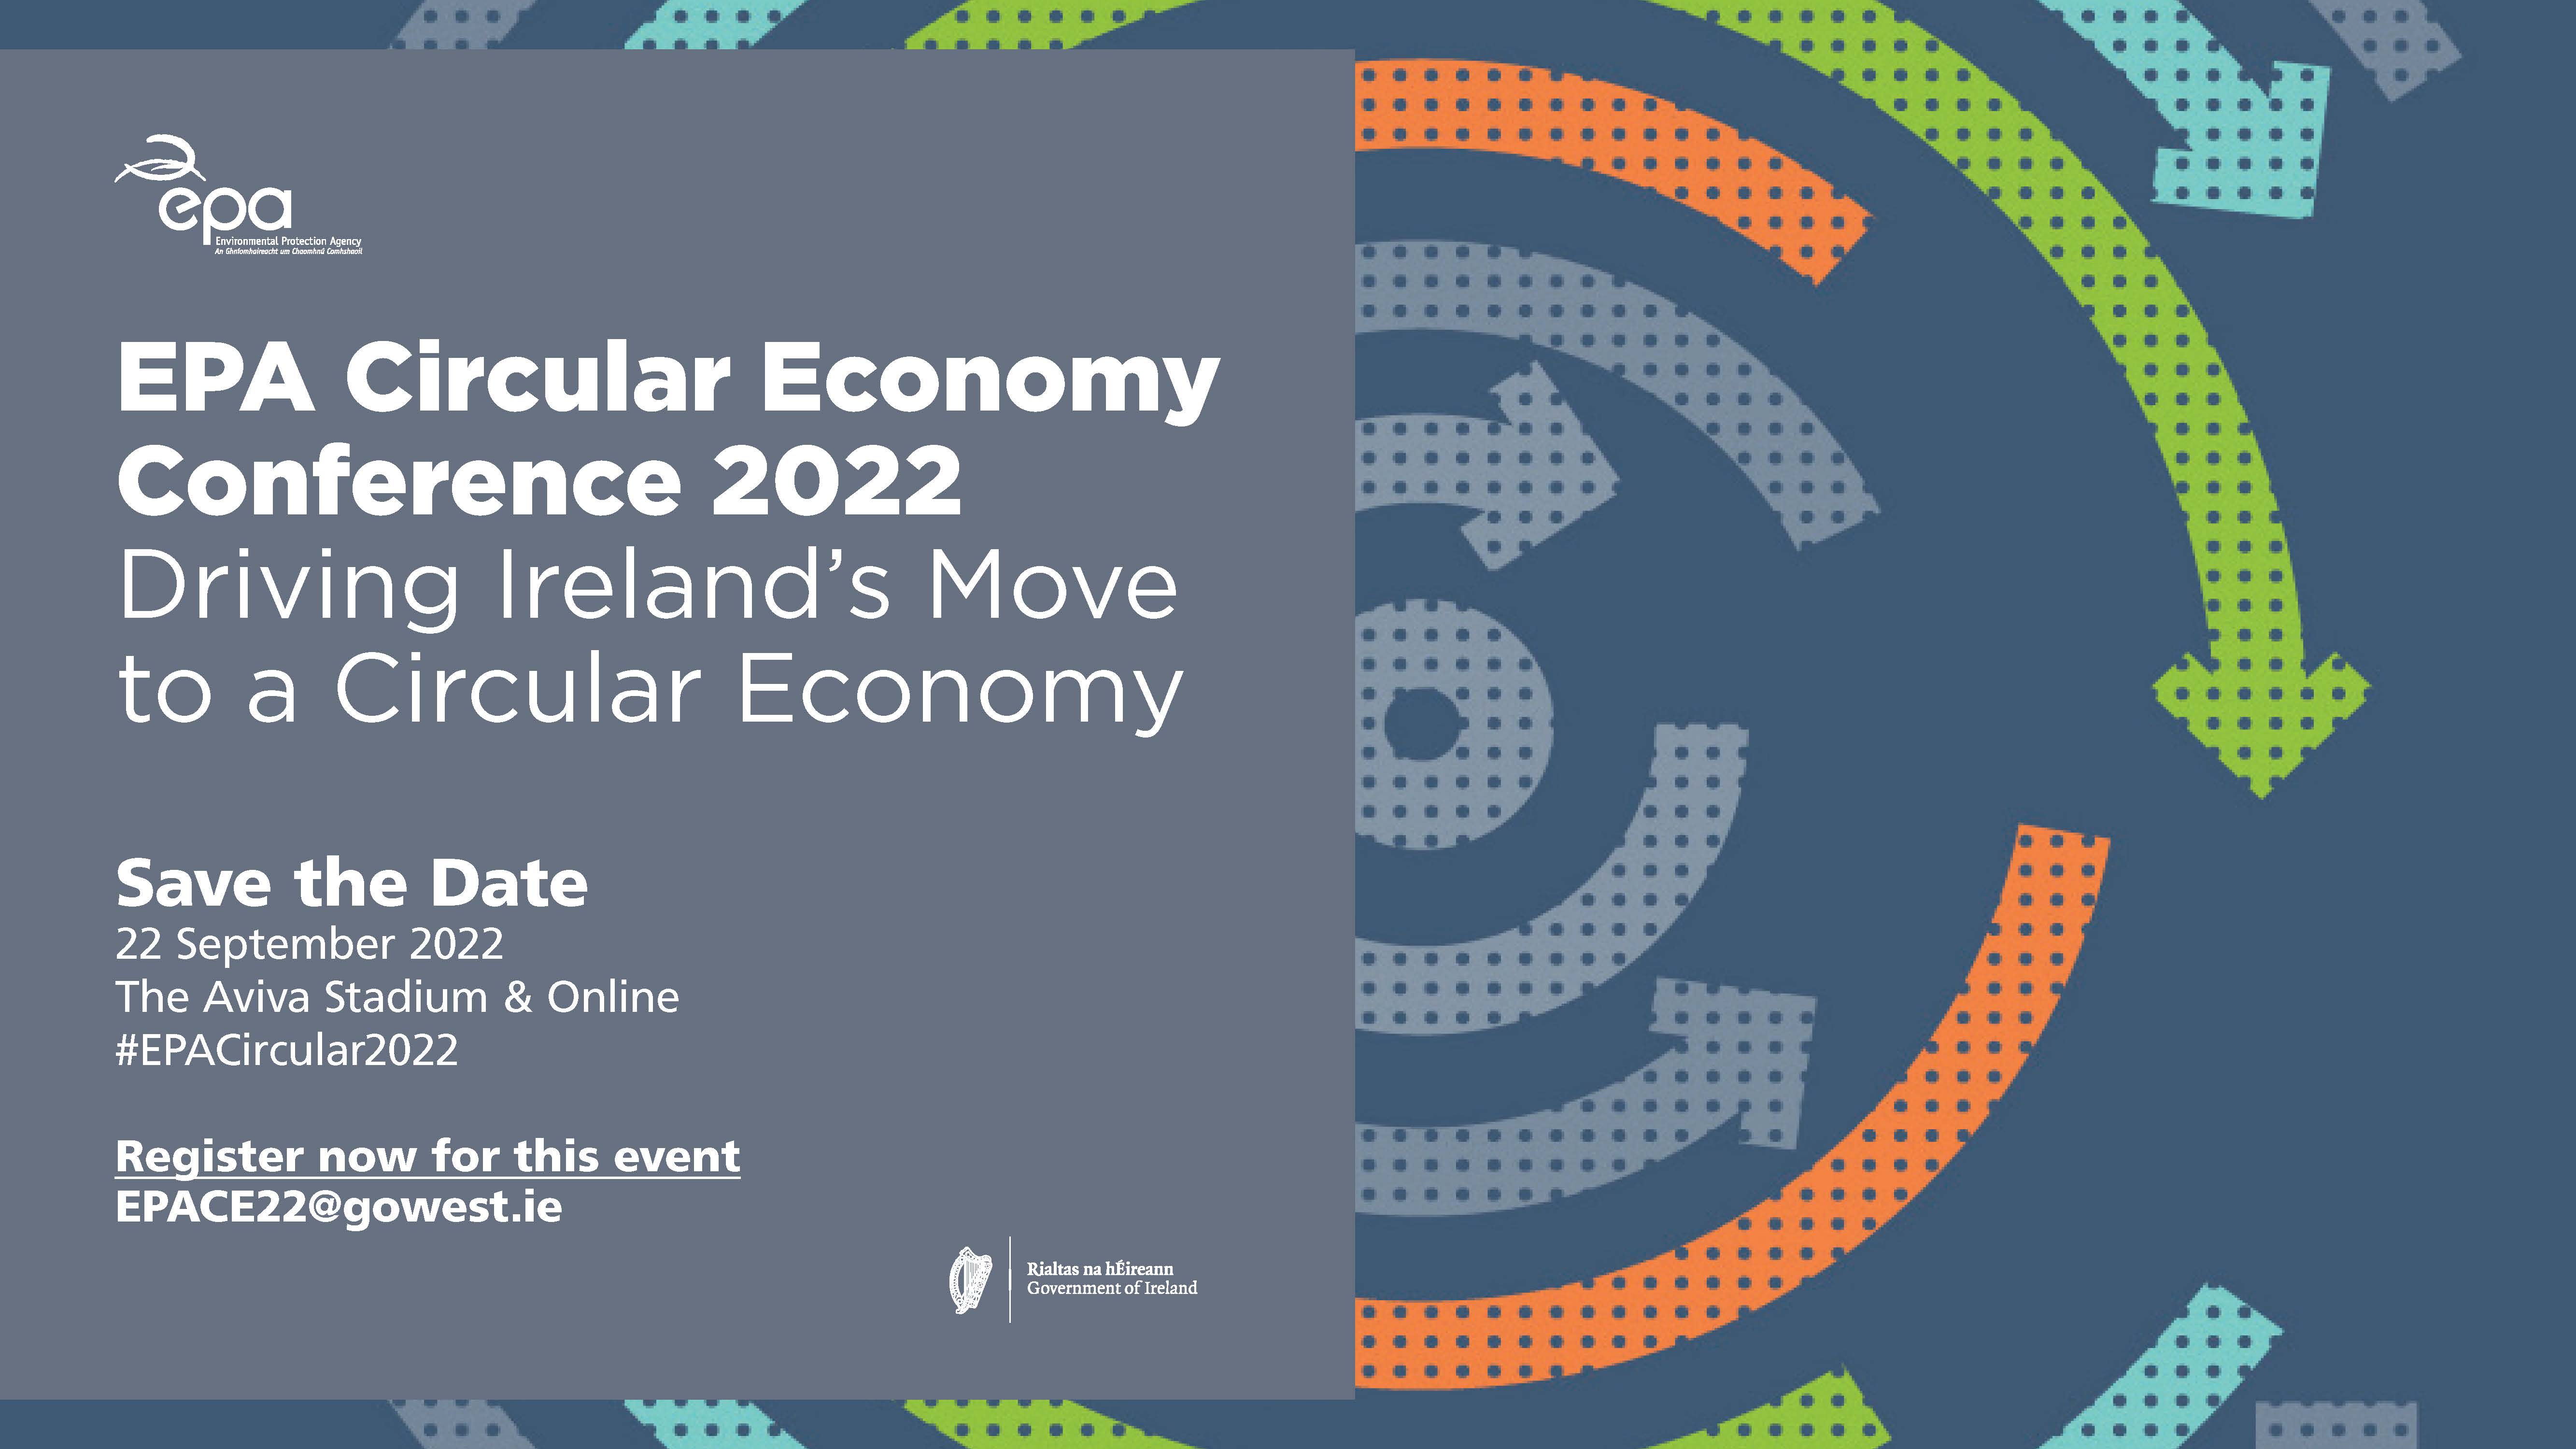 EPA Circular Economy Conference 2022 save the date image